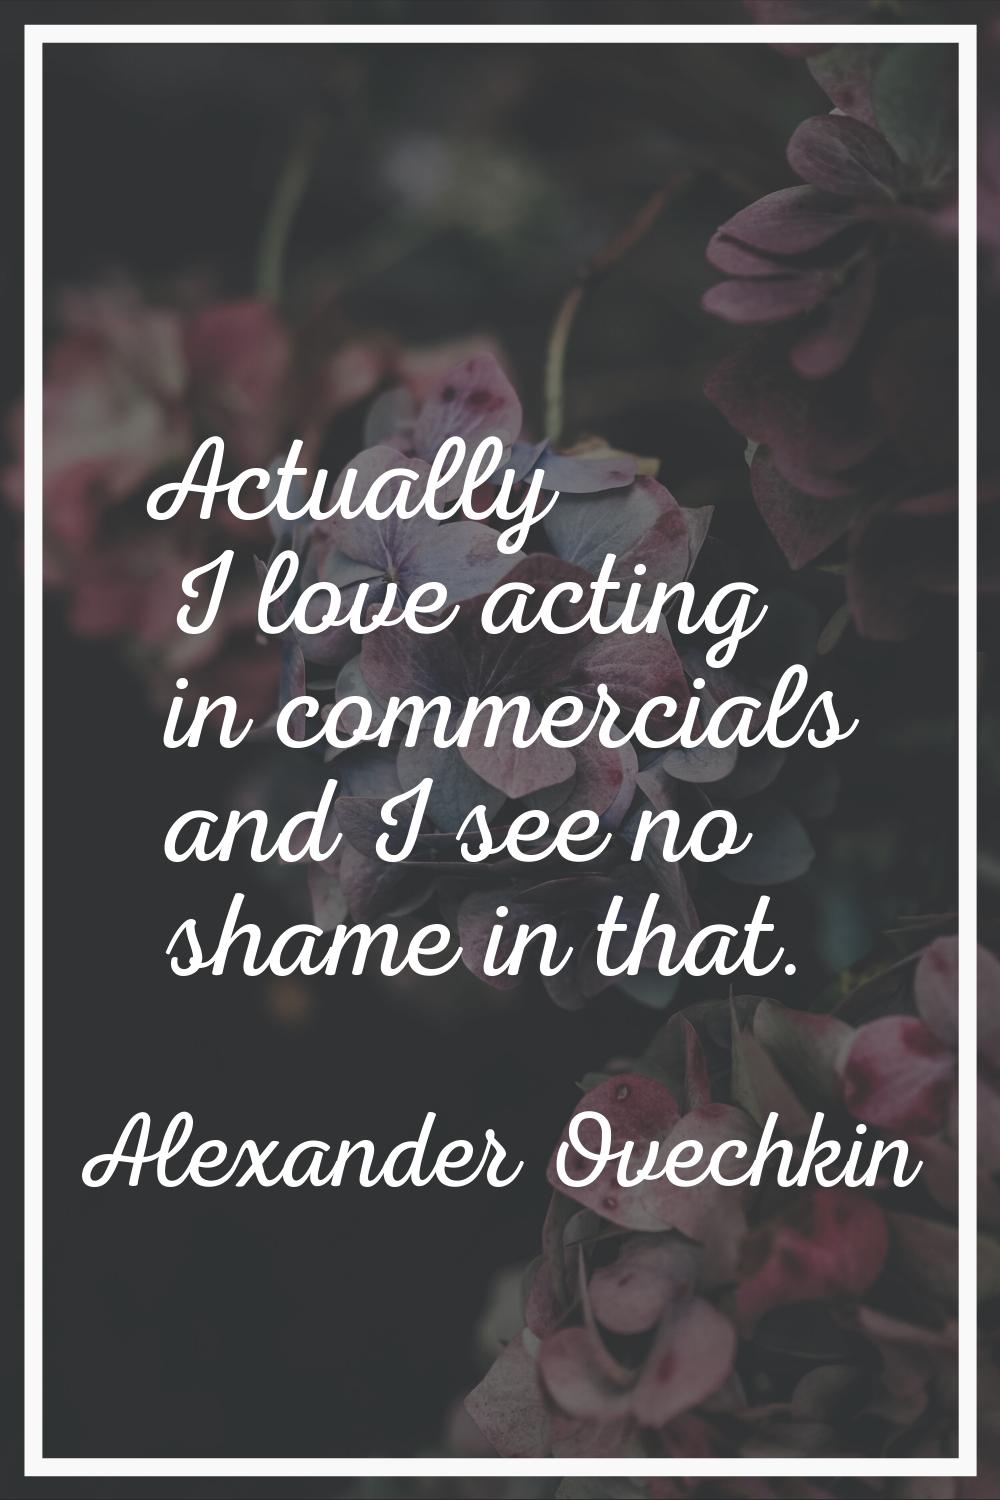 Actually I love acting in commercials and I see no shame in that.